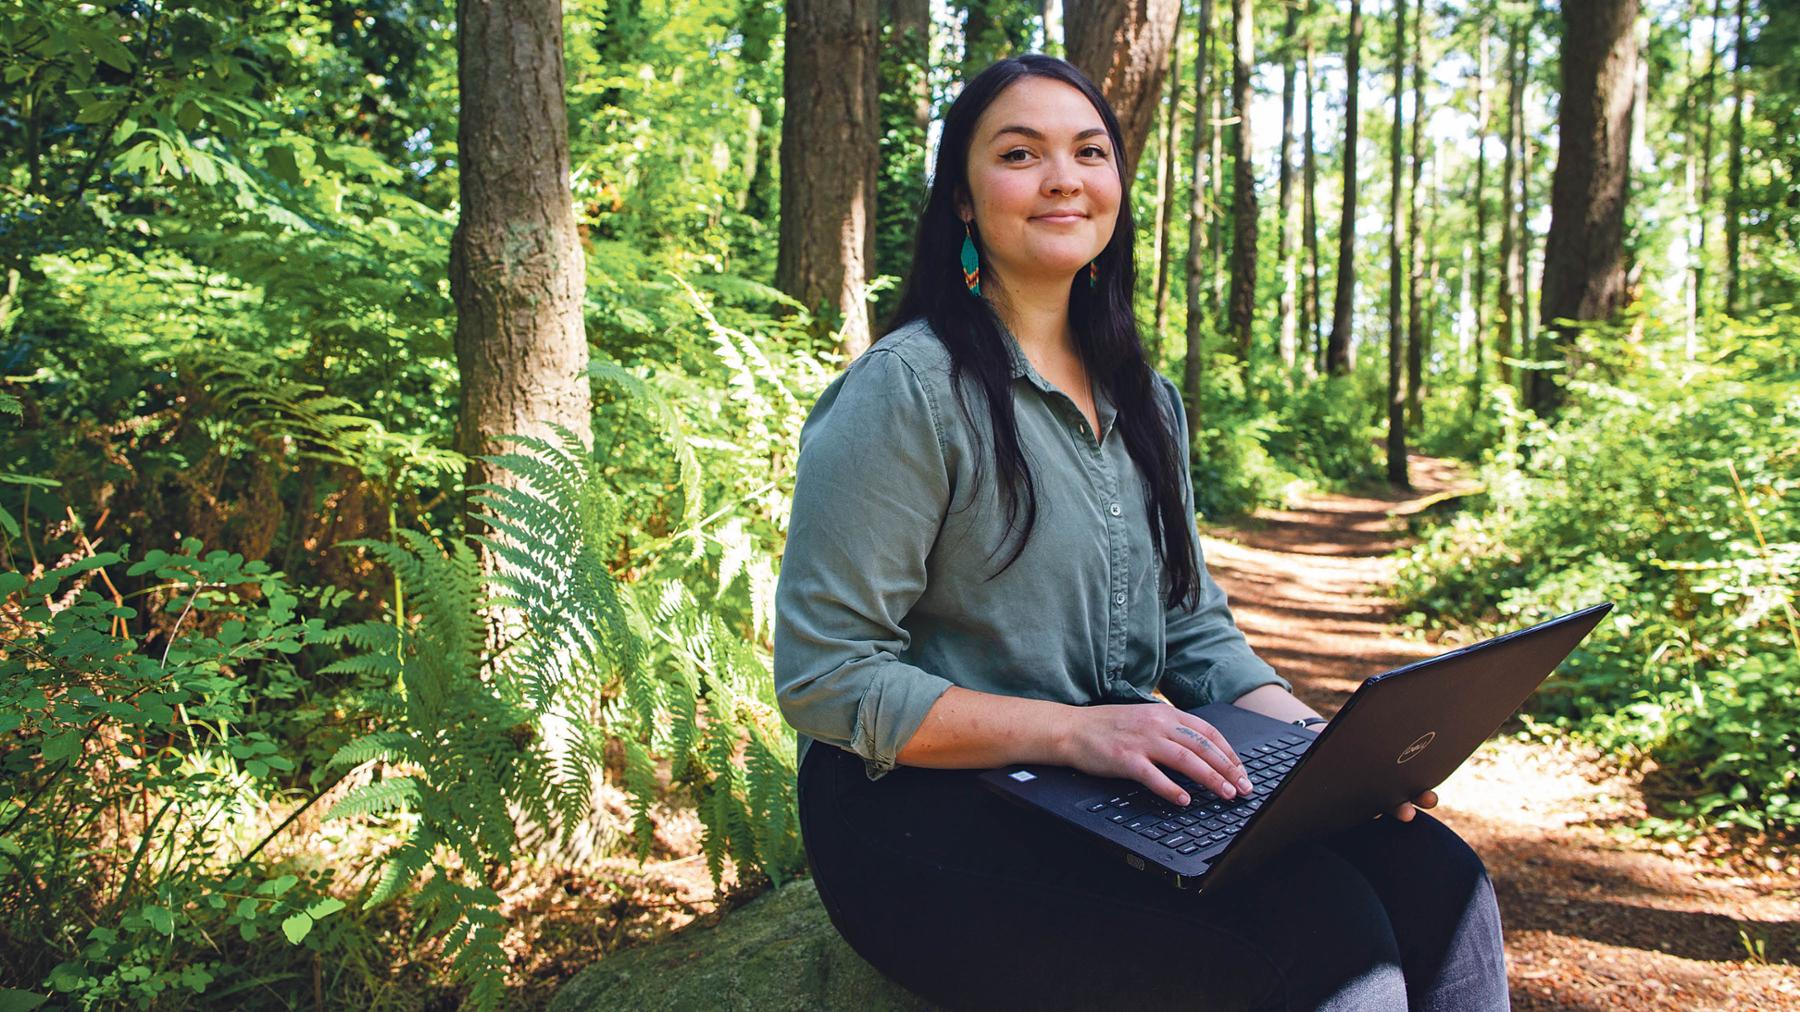 A woman with long hair and a blue shirt sits on a rock in the forest. She is using a laptop.